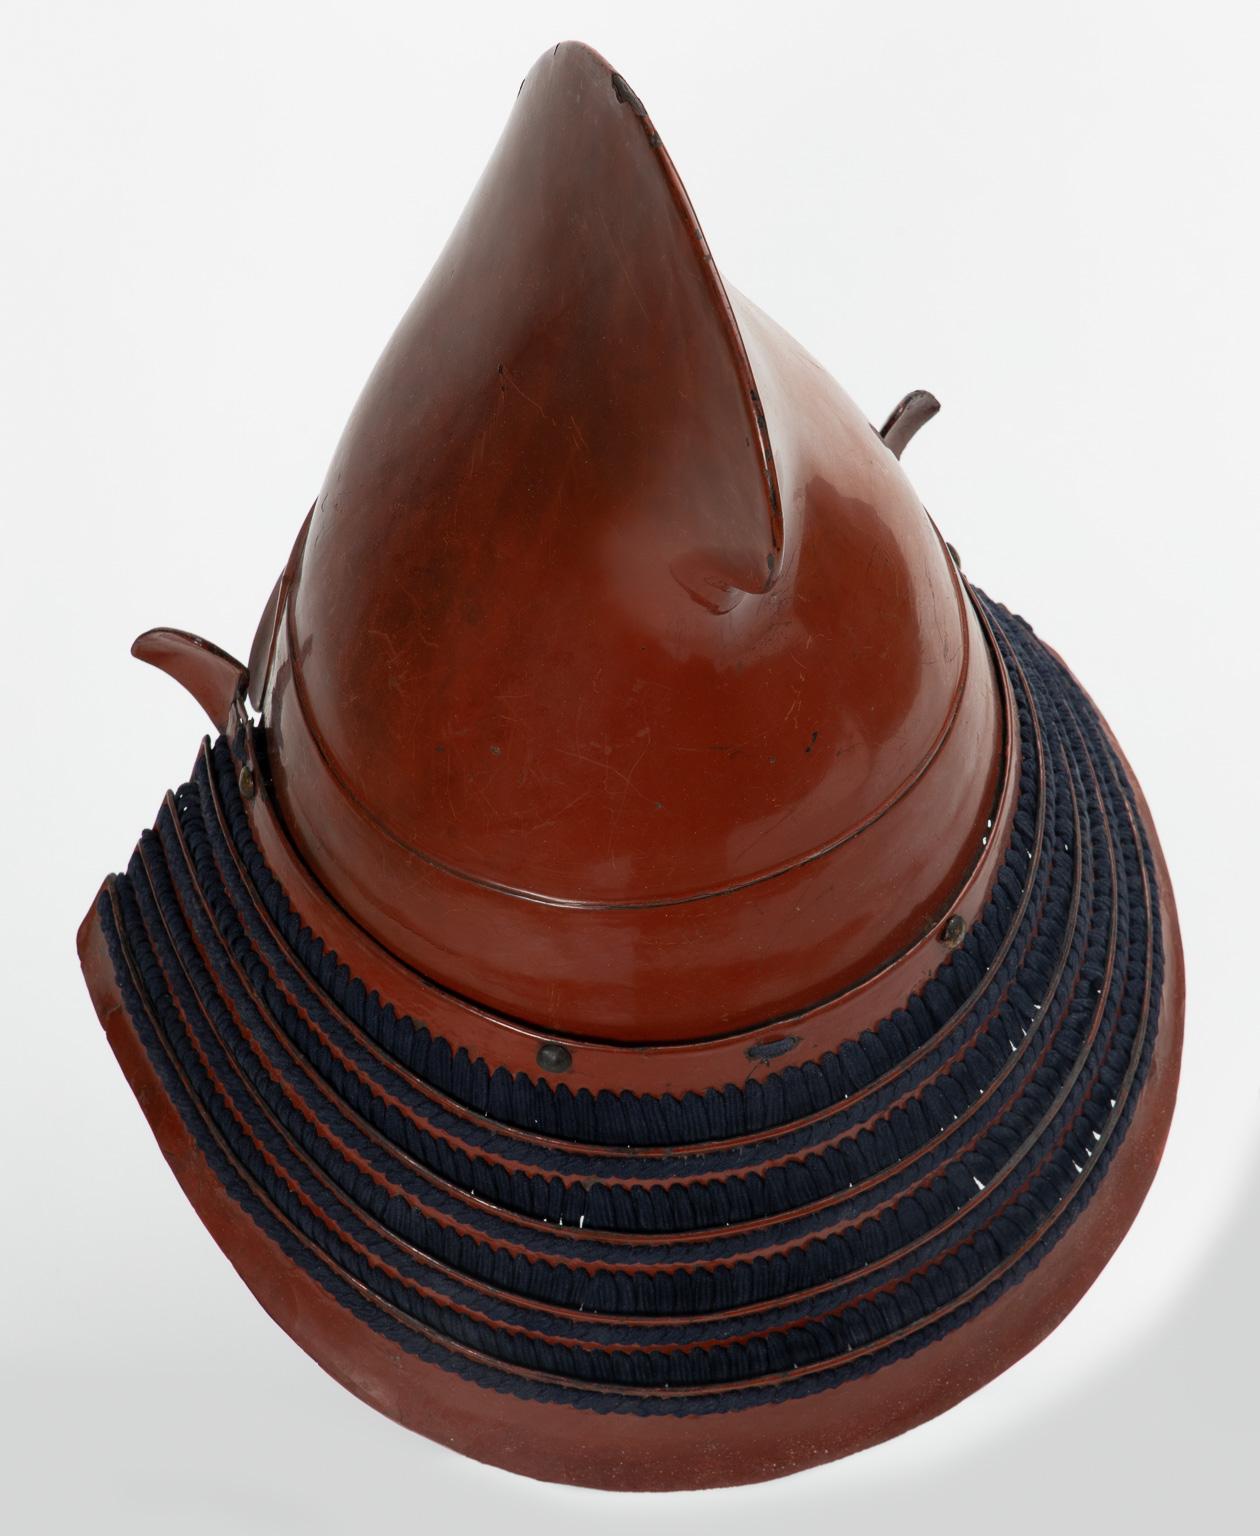 Iron finished in red lacquer
Edo period, 17th century

Among the kawari kabuto that reproduce shapes of headgears, the eboshi was a favorite by samurai since ancient times. In fact, helmets in the form of this court cap were very popular already